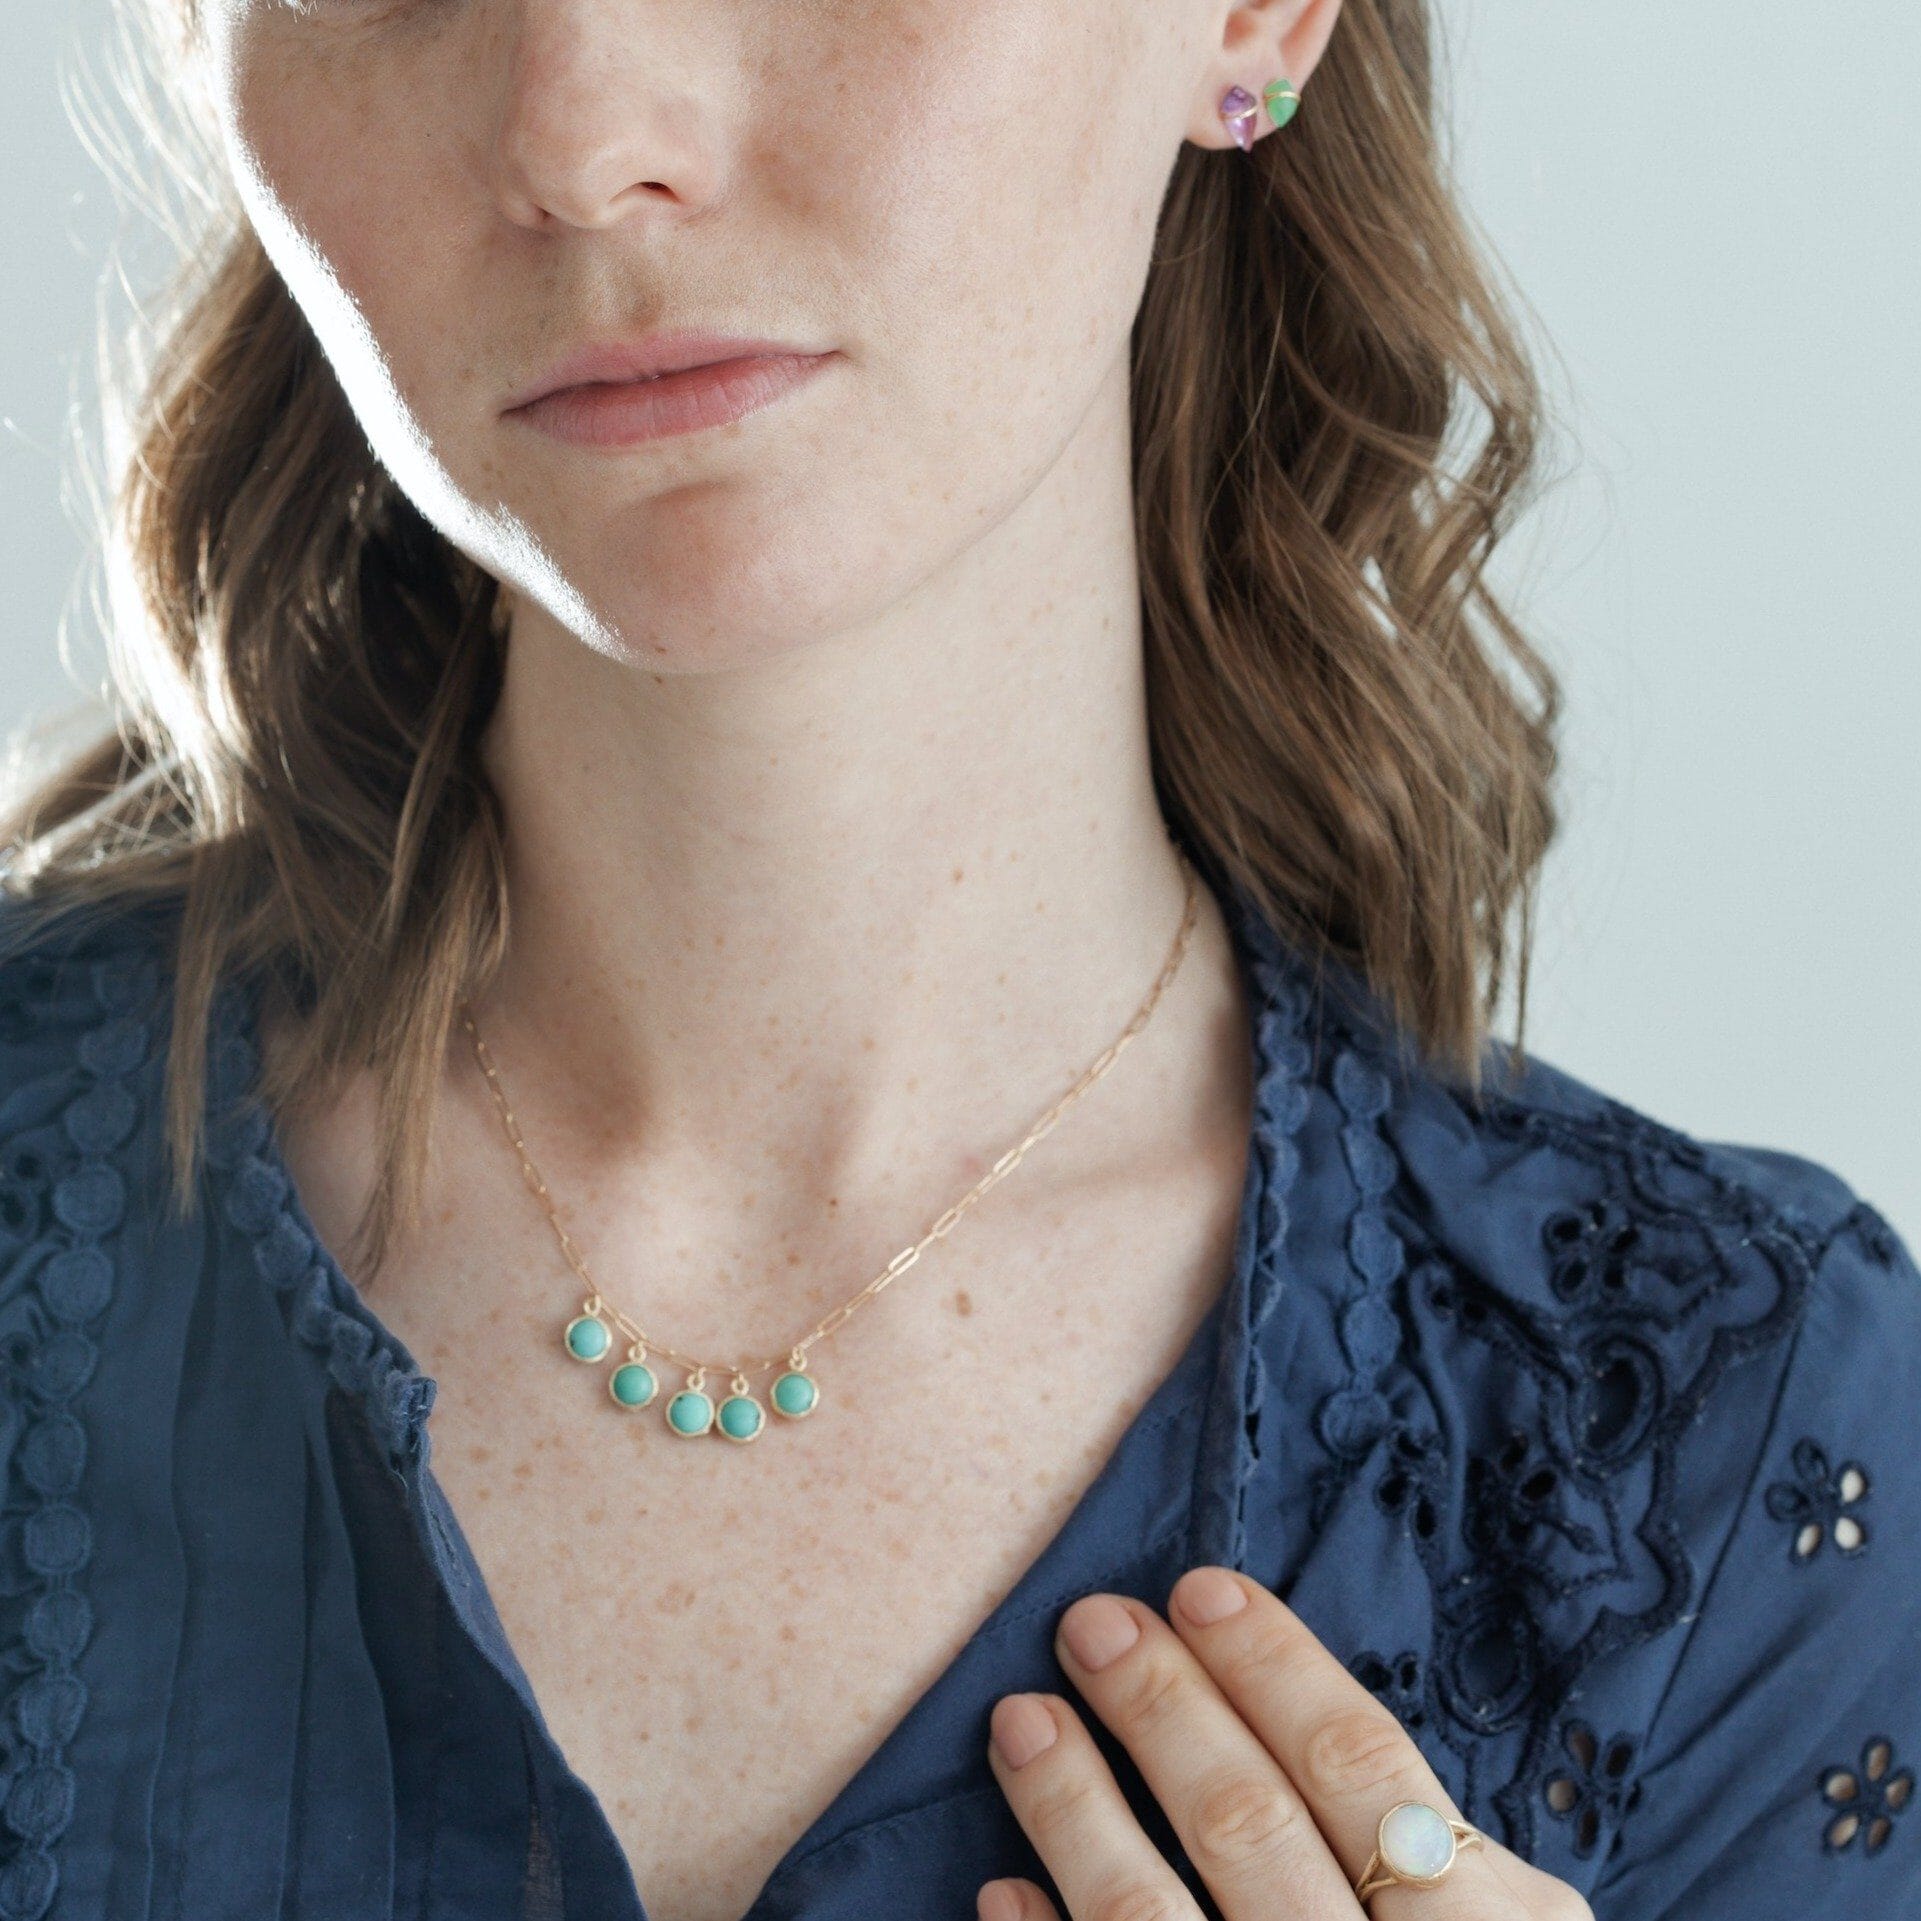 Model wearing handmade necklace with five turquoise drops in 10kt gold